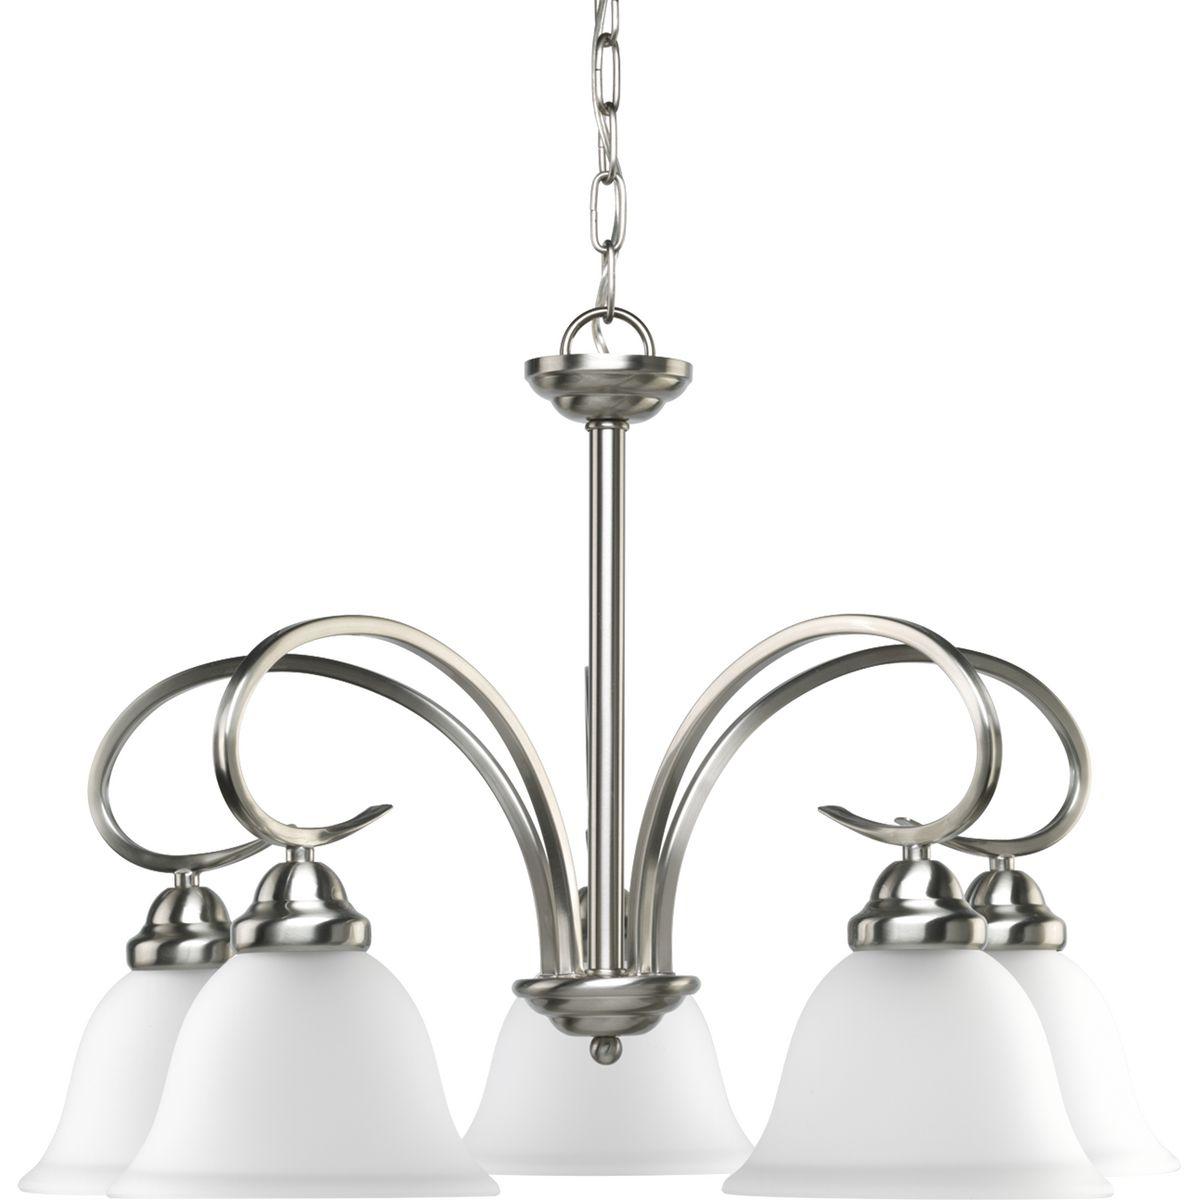 Hubbell HS41004-09 Featuring delicate scrolled metalwork and soft details, this casual five-light chandelier is perfect for many interiors. Slightly tapered etched glass shades are completed by a Brushed Nickel finish. This fixture is hung with the shades facing downwards o